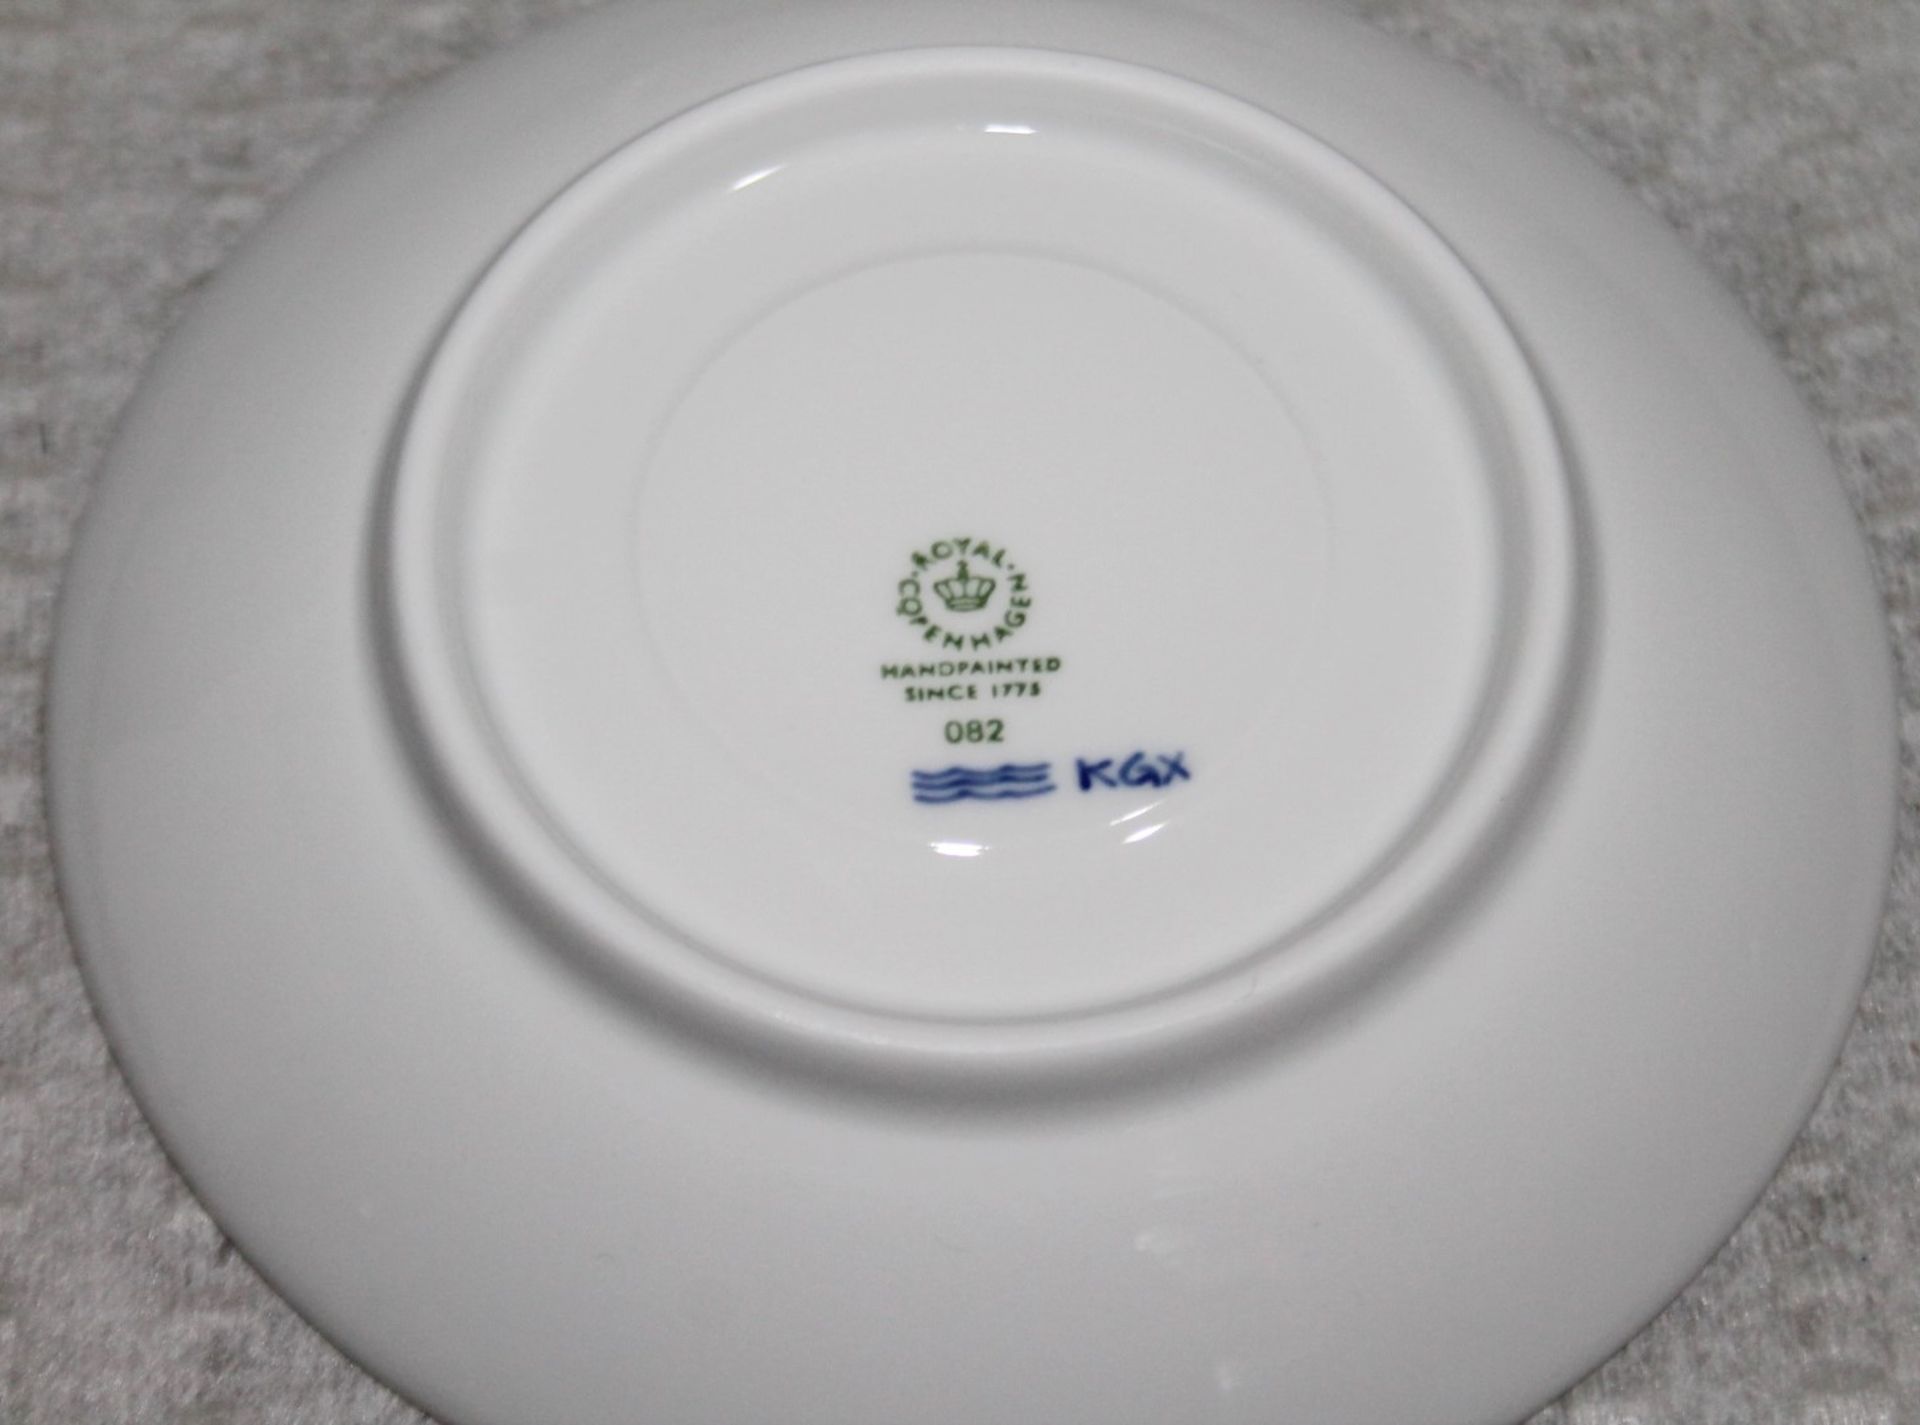 1 x ROYAL COPENHAGEN Princess Teacup and Saucer - Capacity: 200ml - Unused Boxed Stock - Ref: - Image 3 of 10